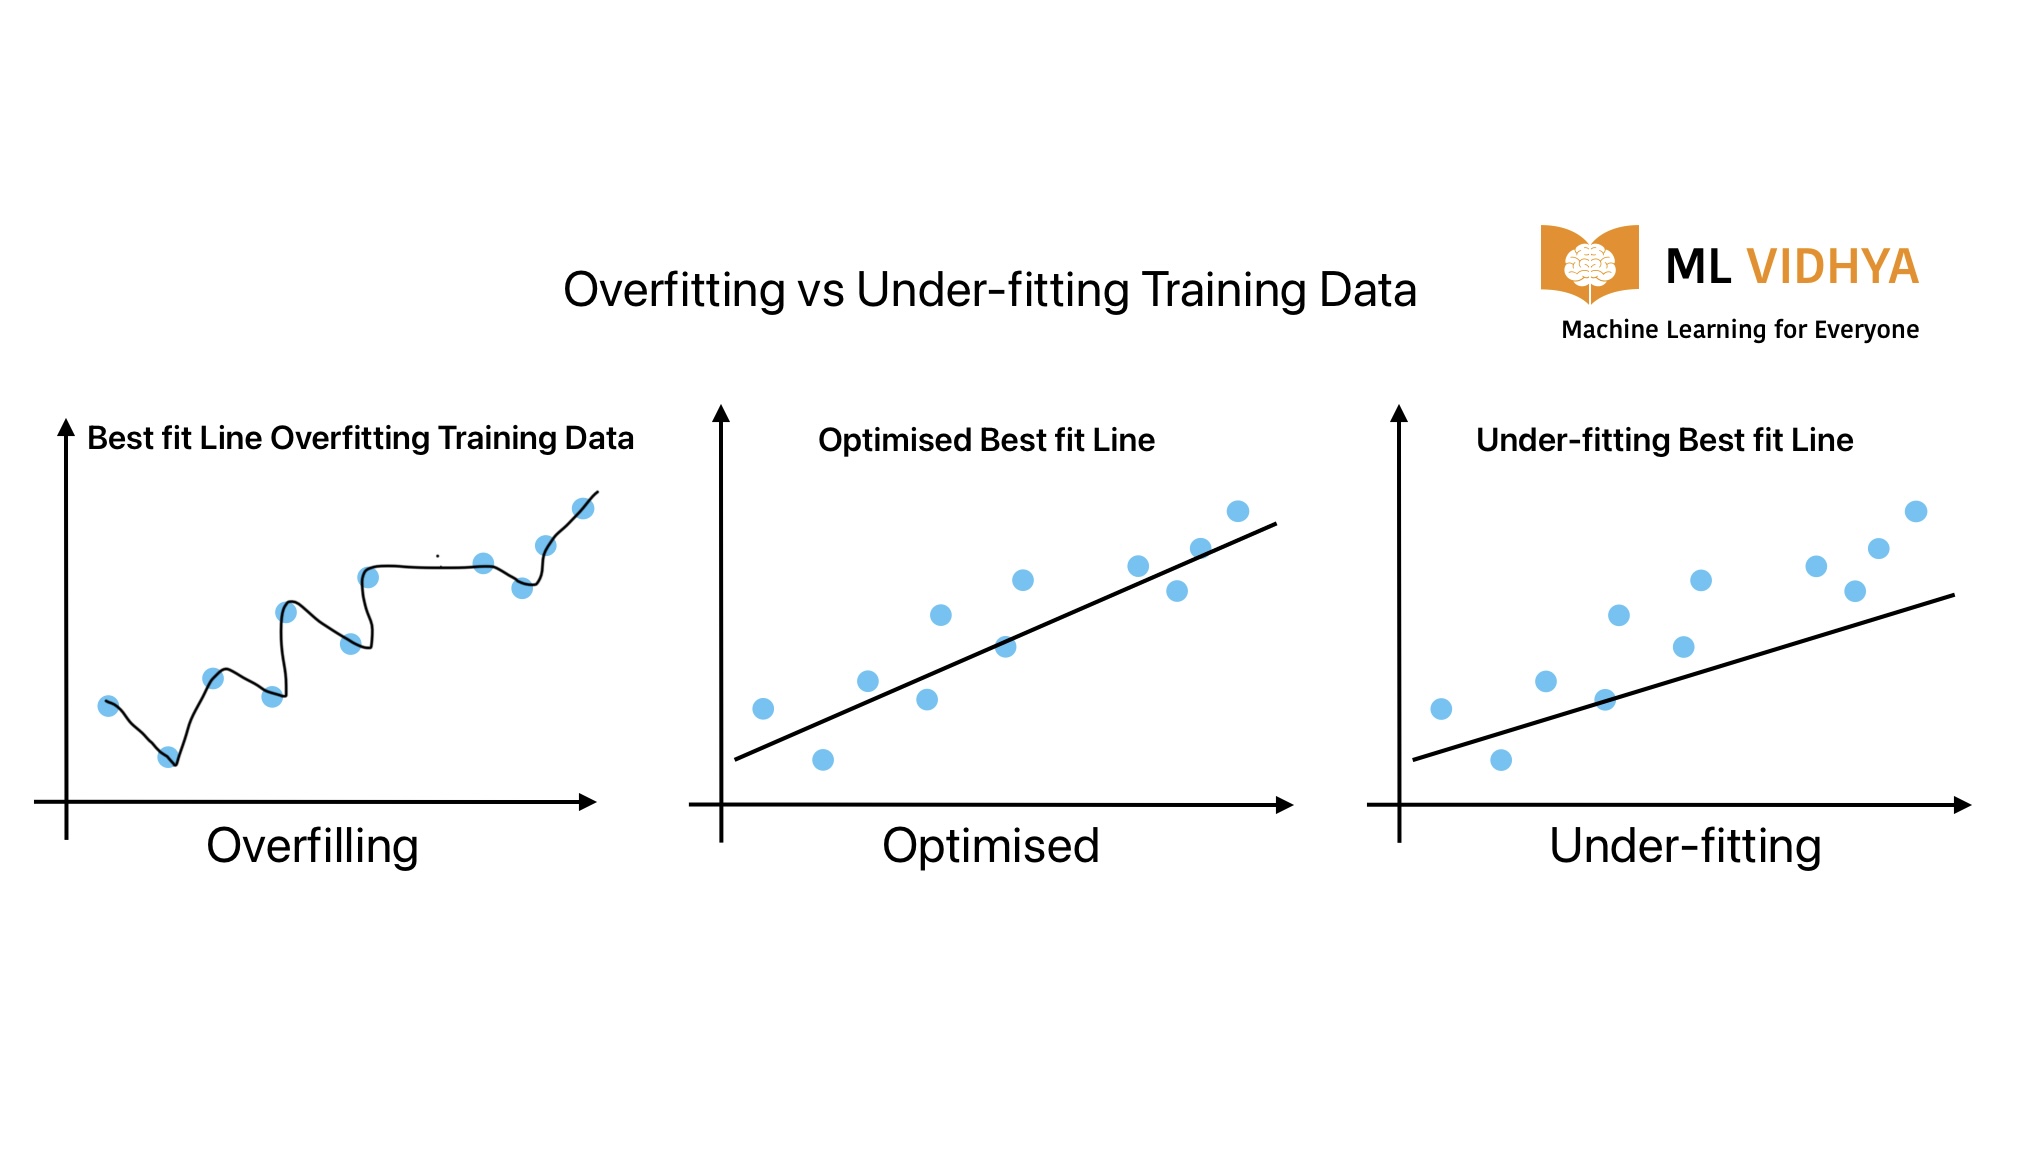 This image shows the difference in Overfitting and underfitting in machine learning.